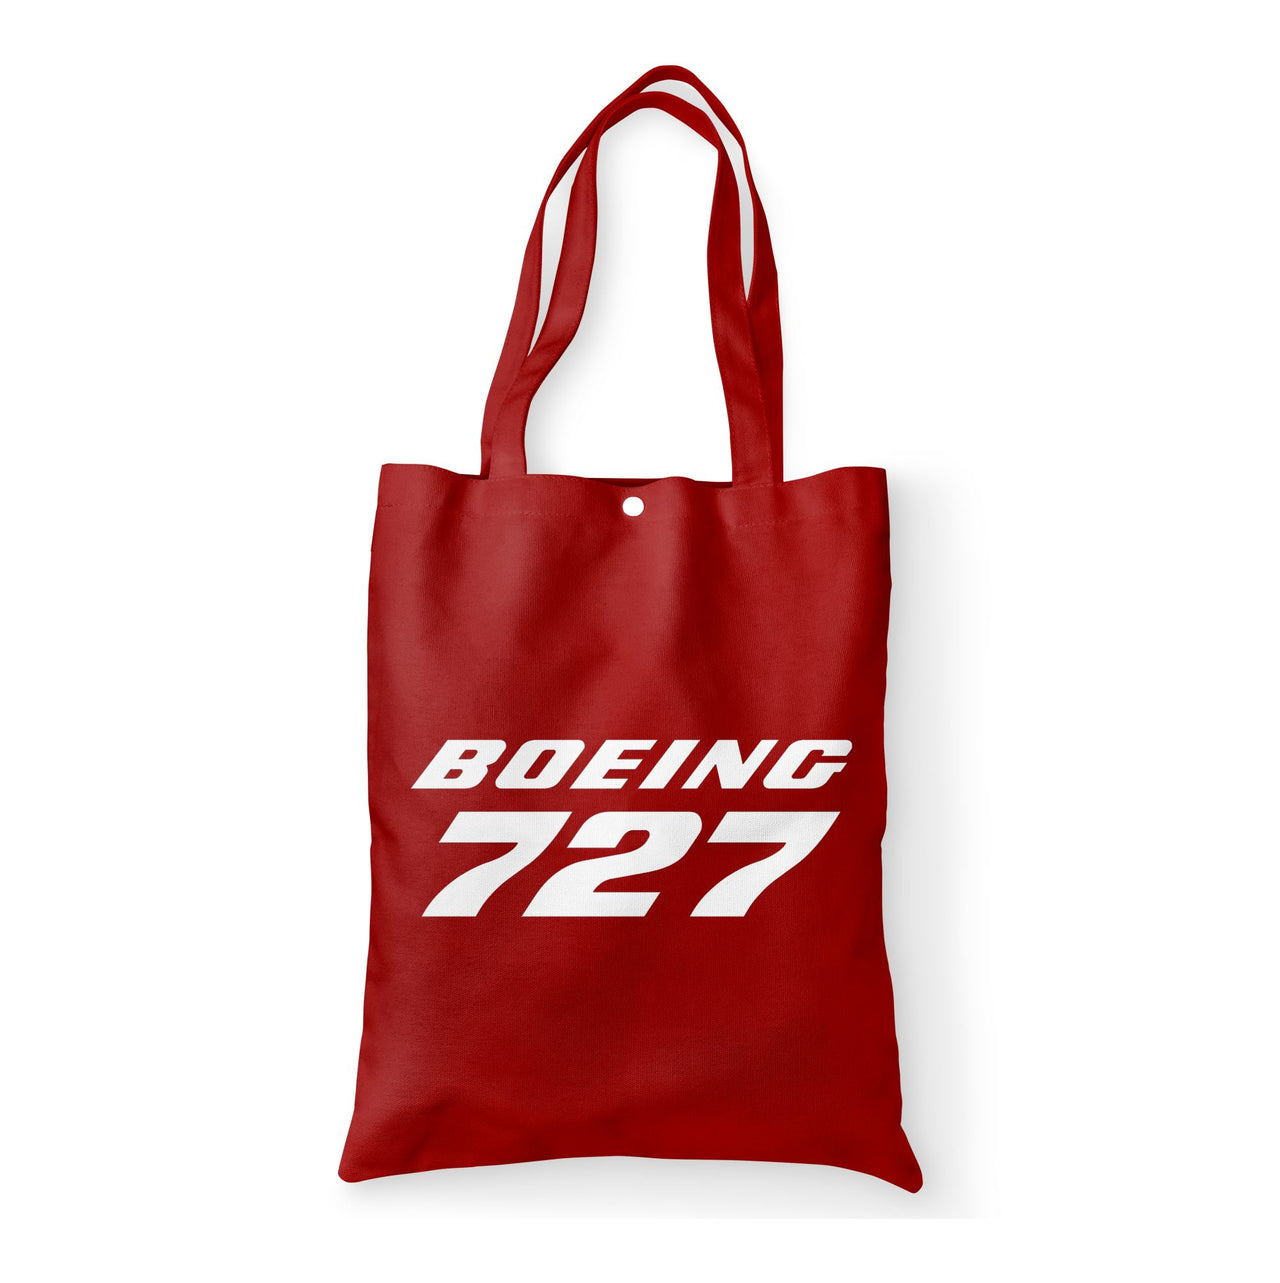 Boeing 727 & Text Designed Tote Bags